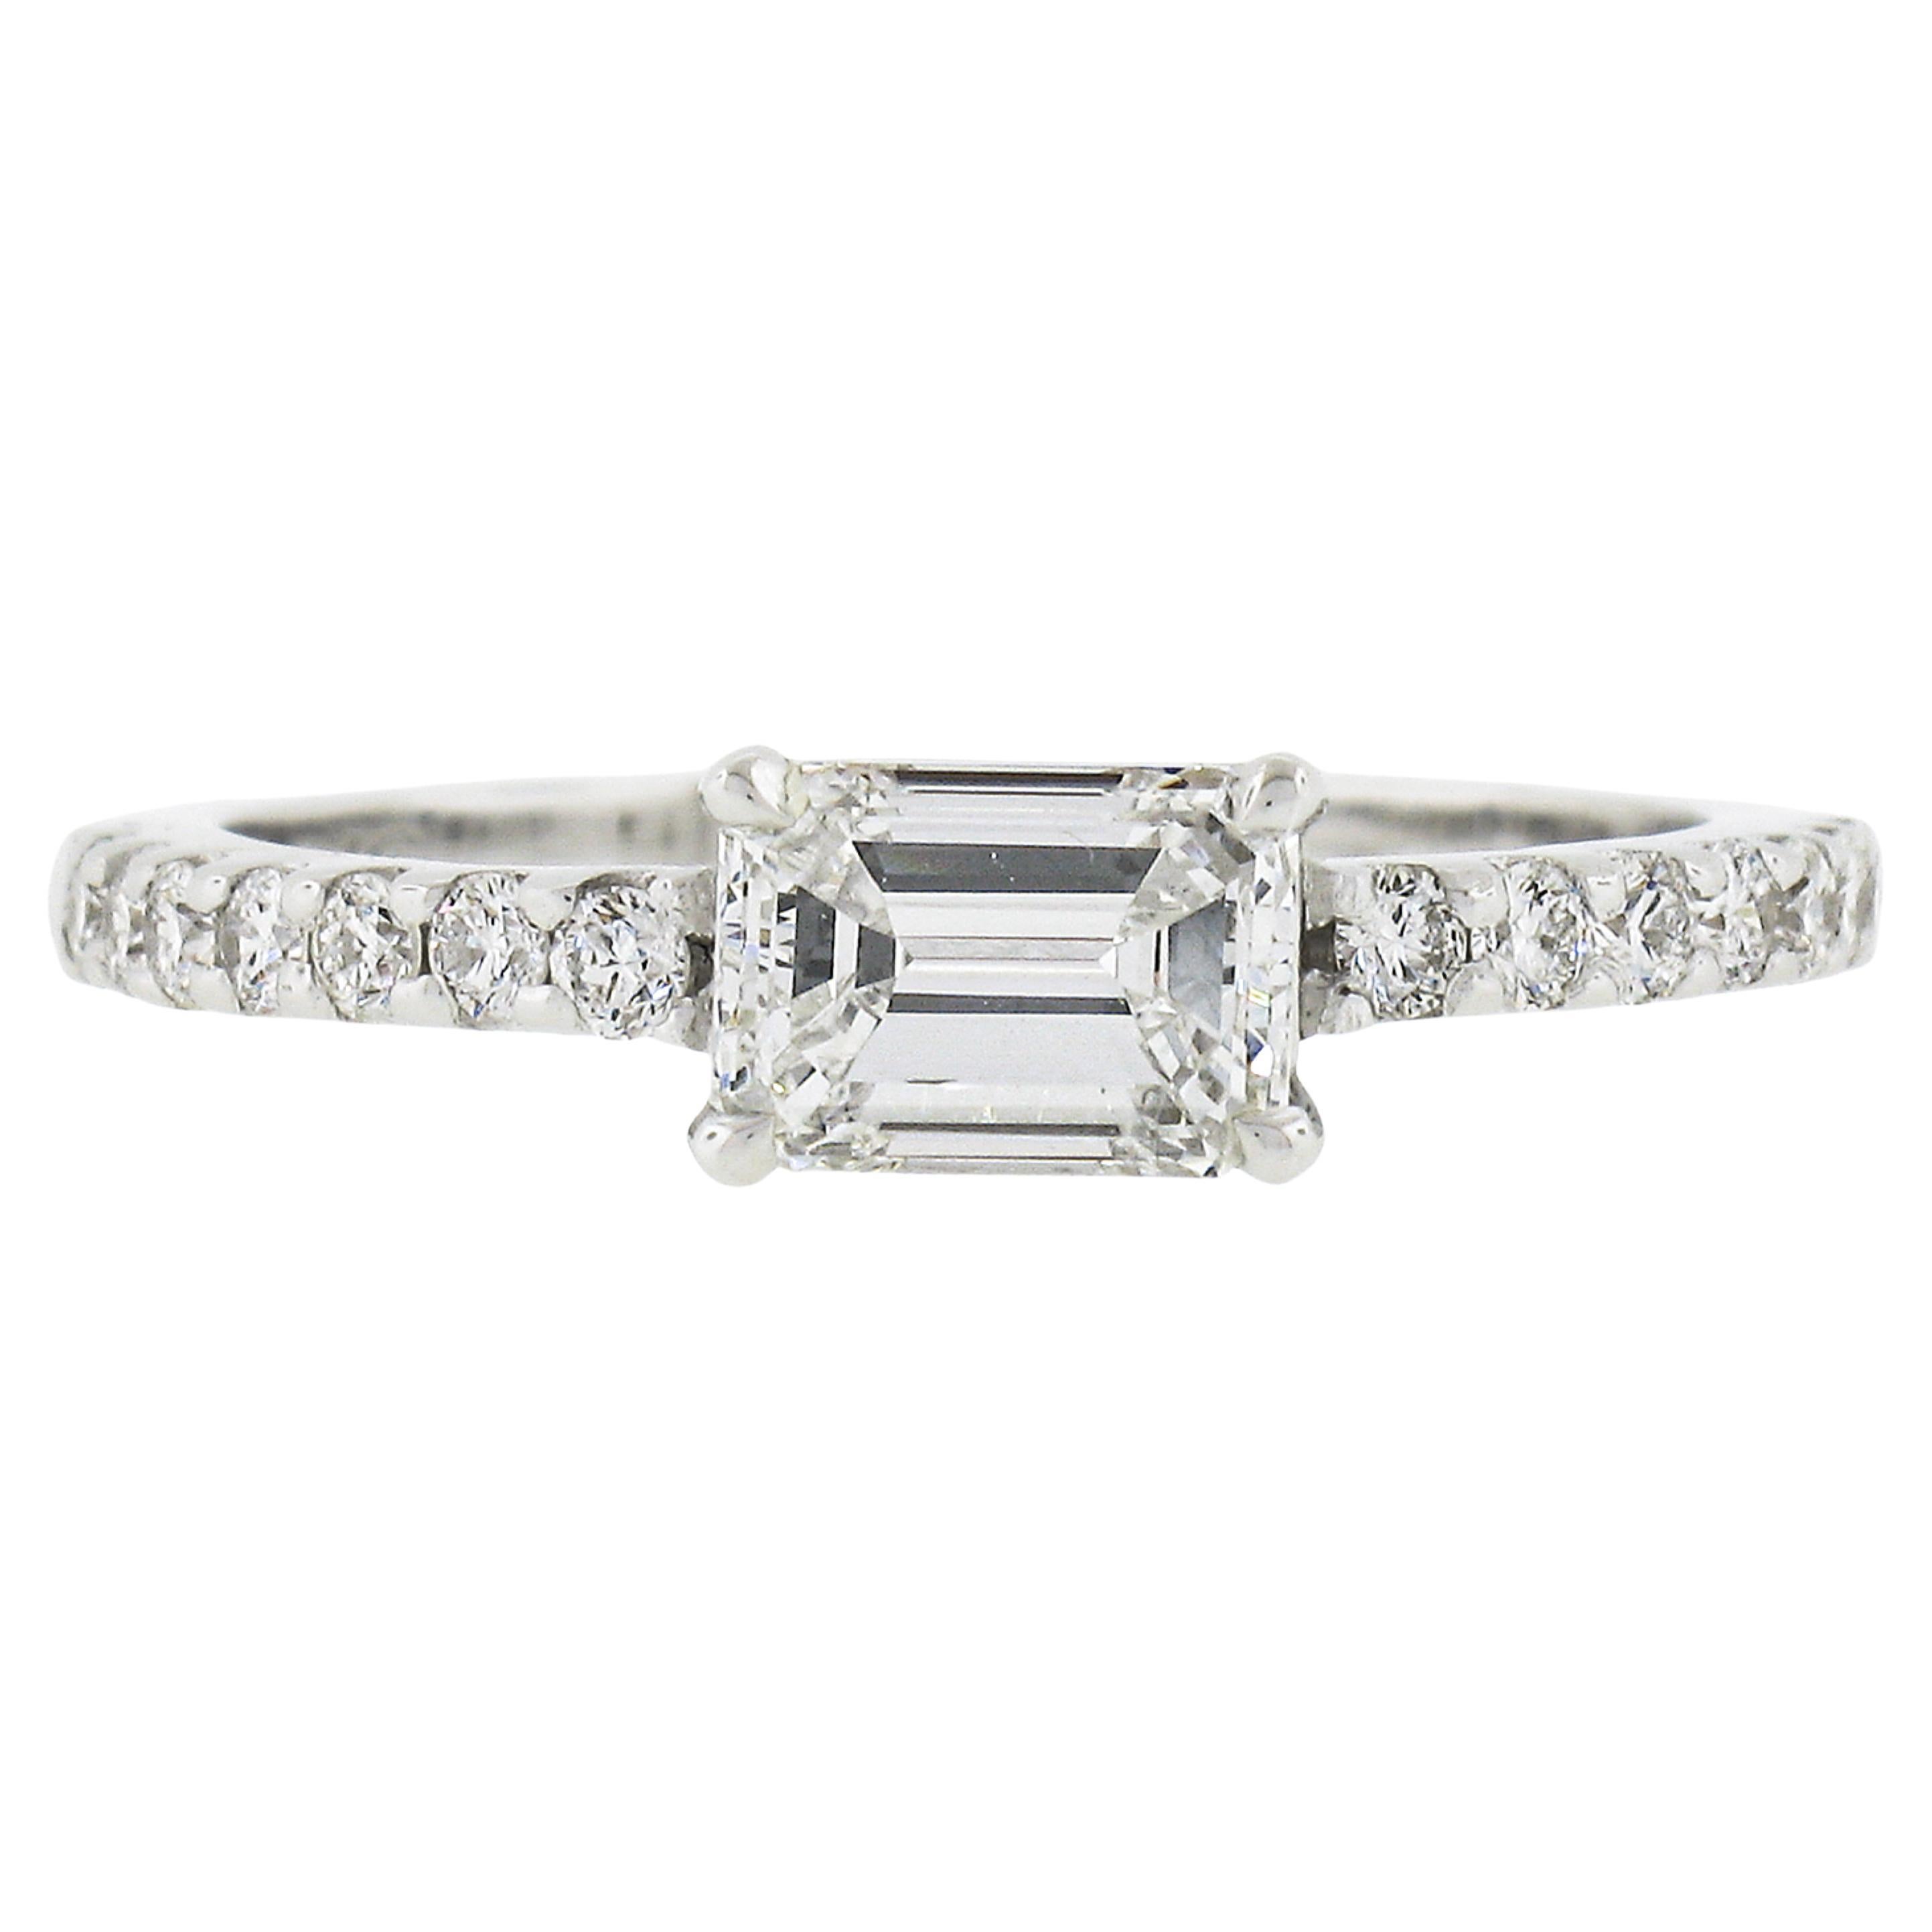 14k White Gold 1.21ct GIA Emerald Cut Sideways Diamond Solitaire Engagement Ring